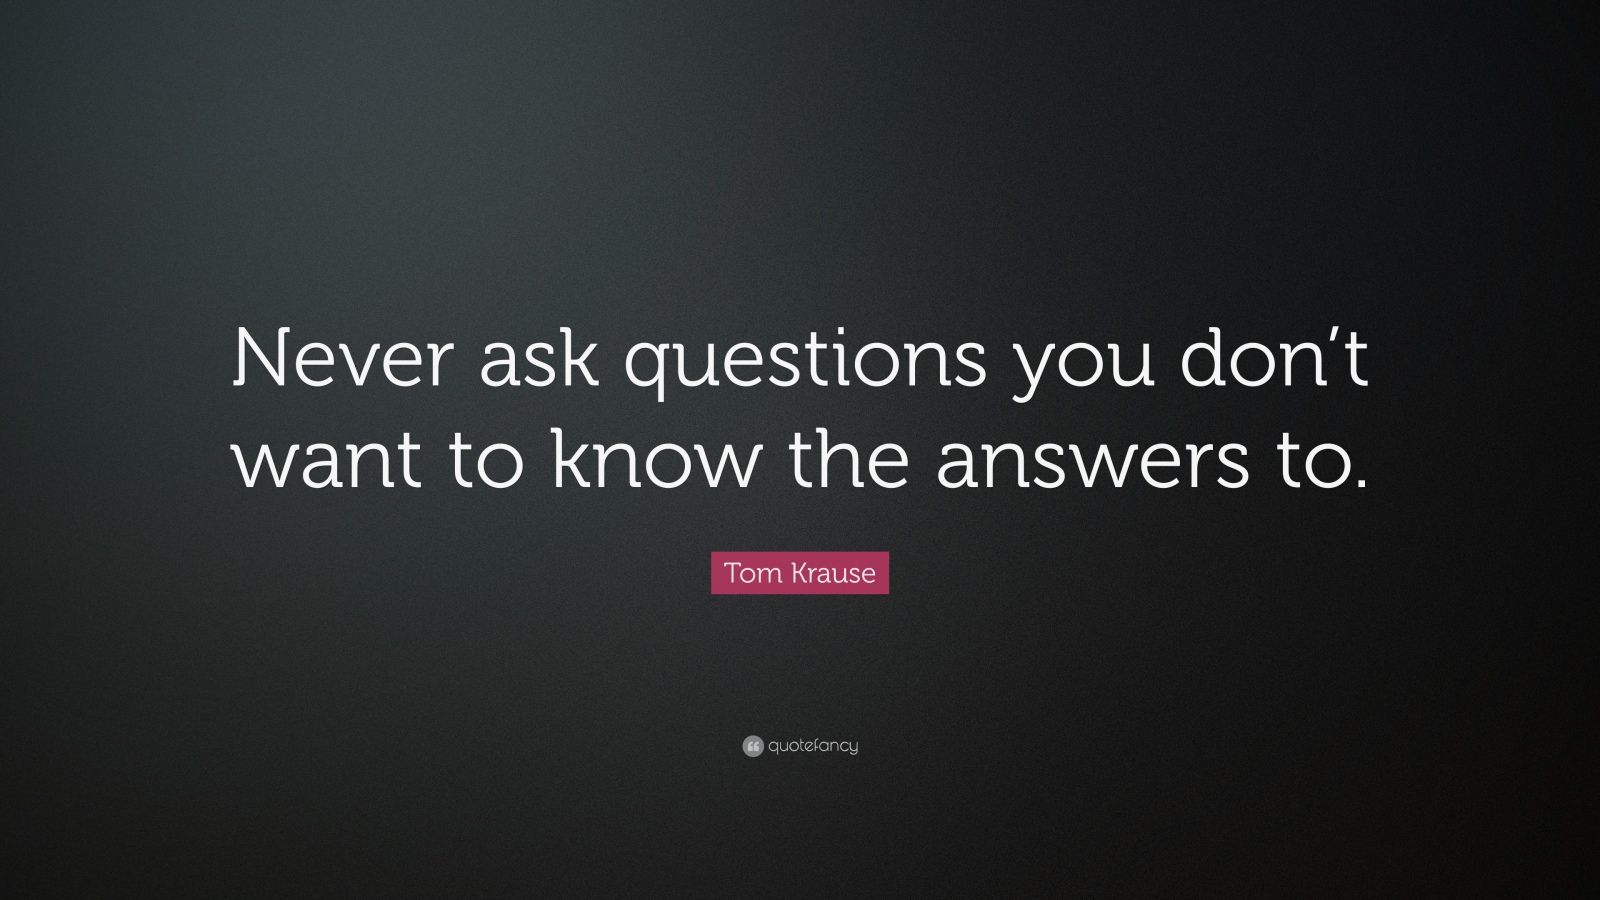 Tom Krause Quote: “Never ask questions you don’t want to know the ...